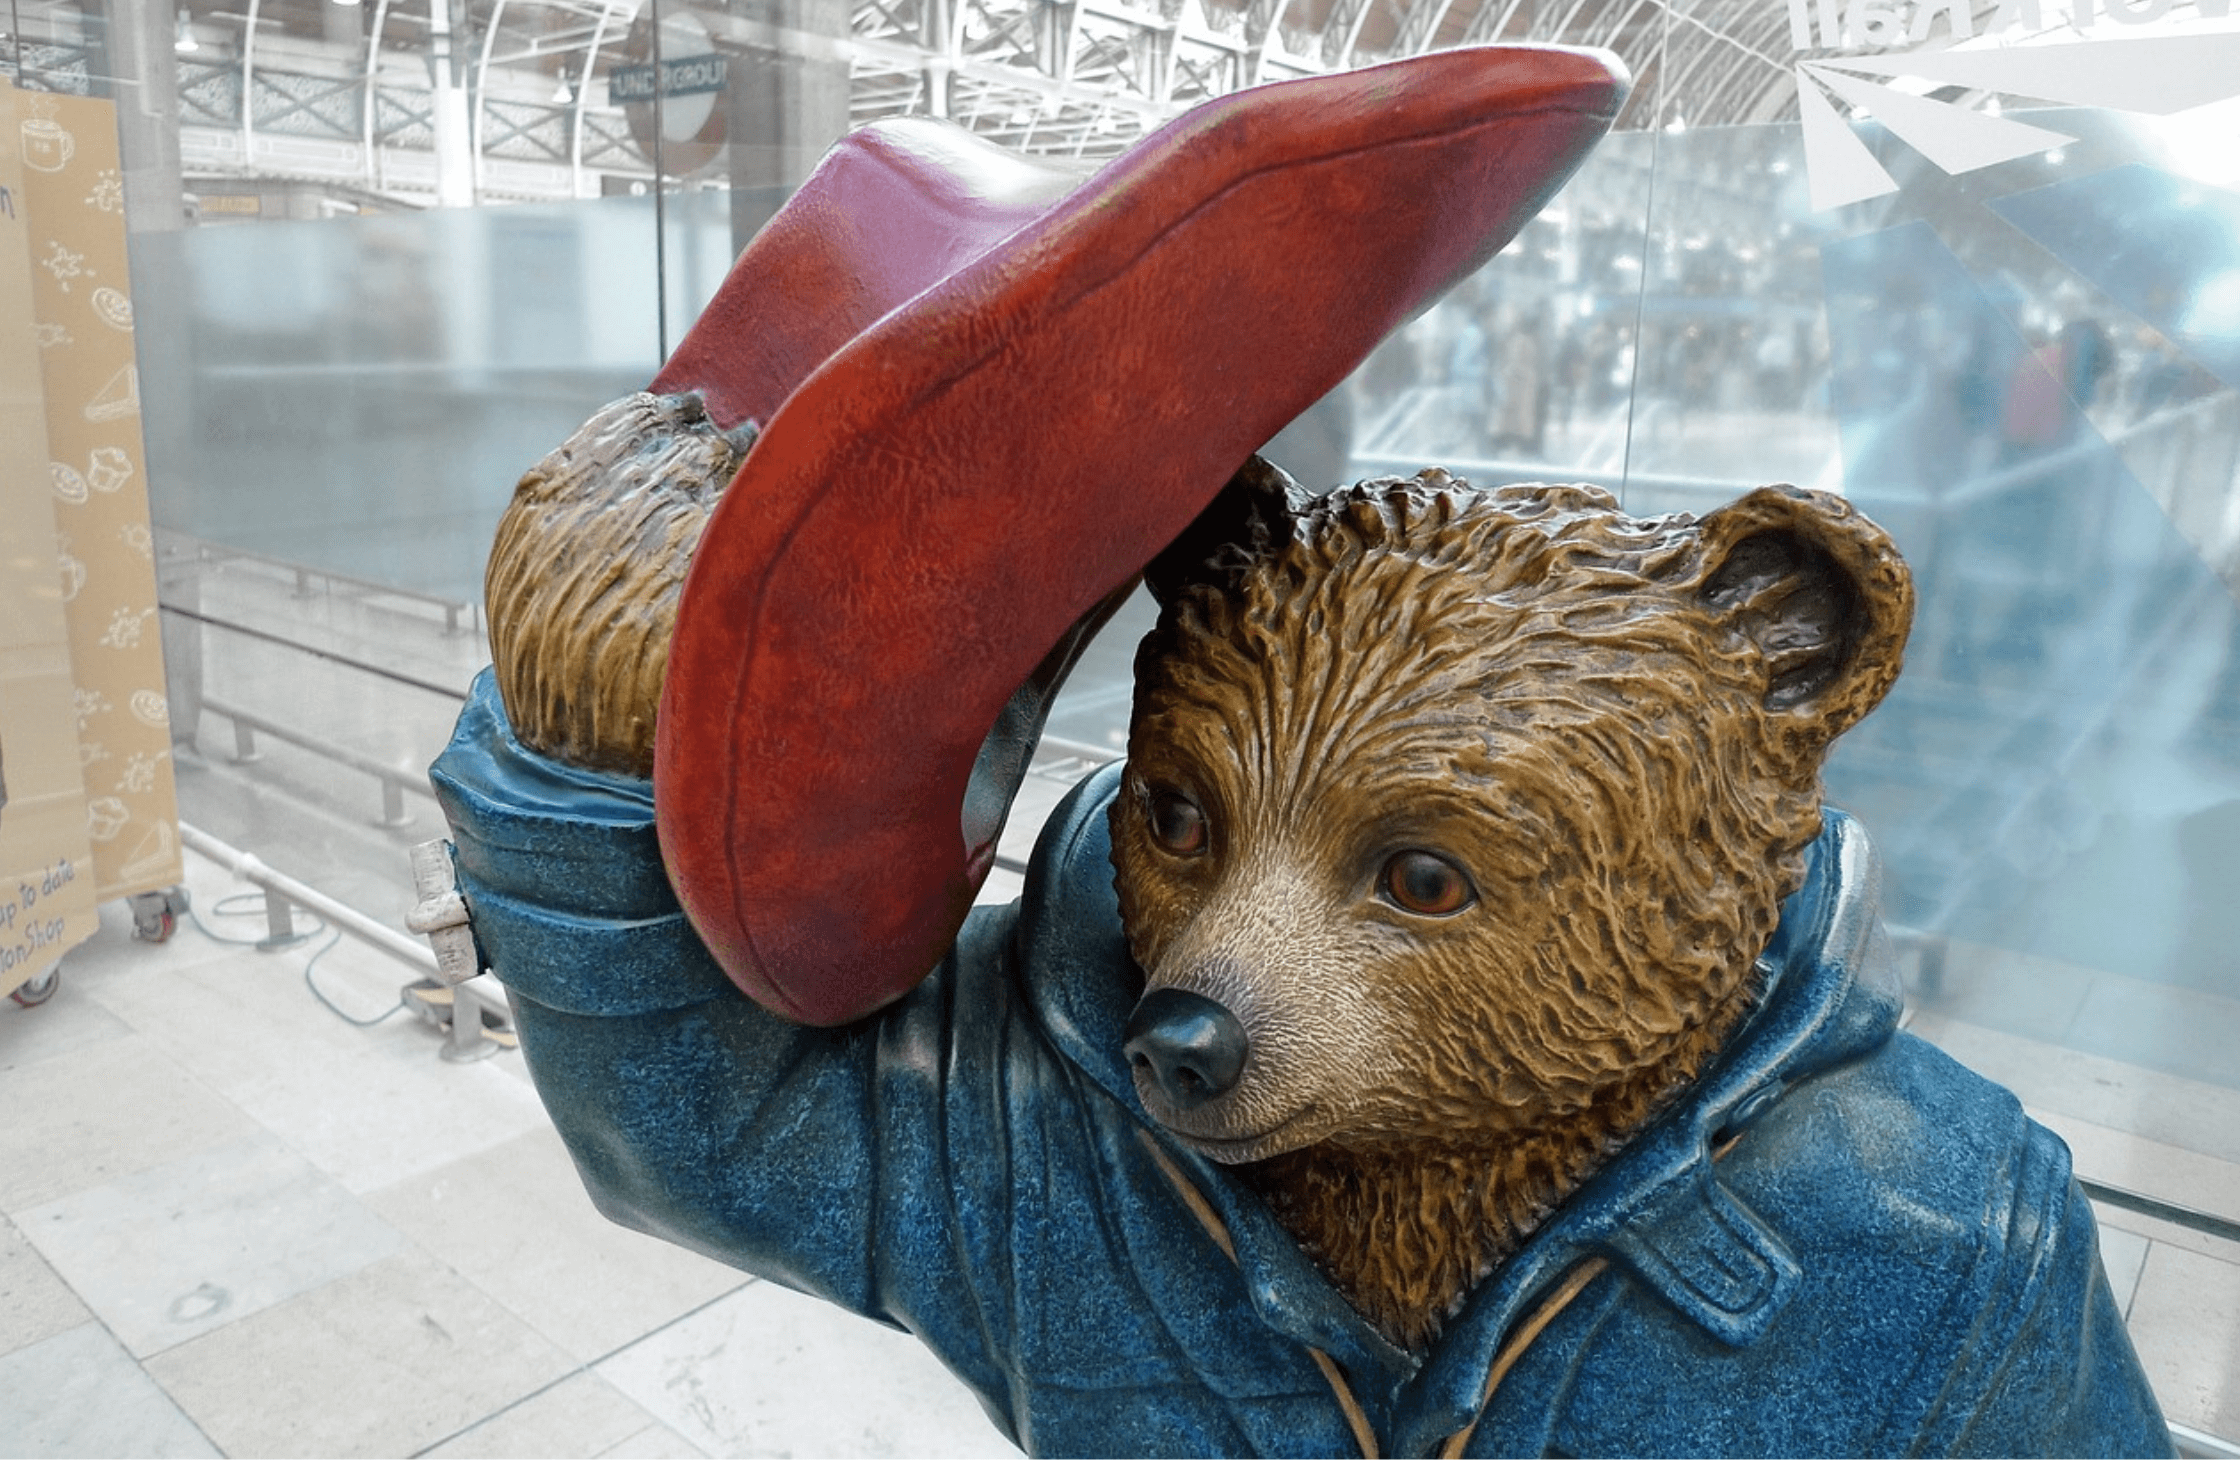 How we can all be like Paddington Bear and our late Queen